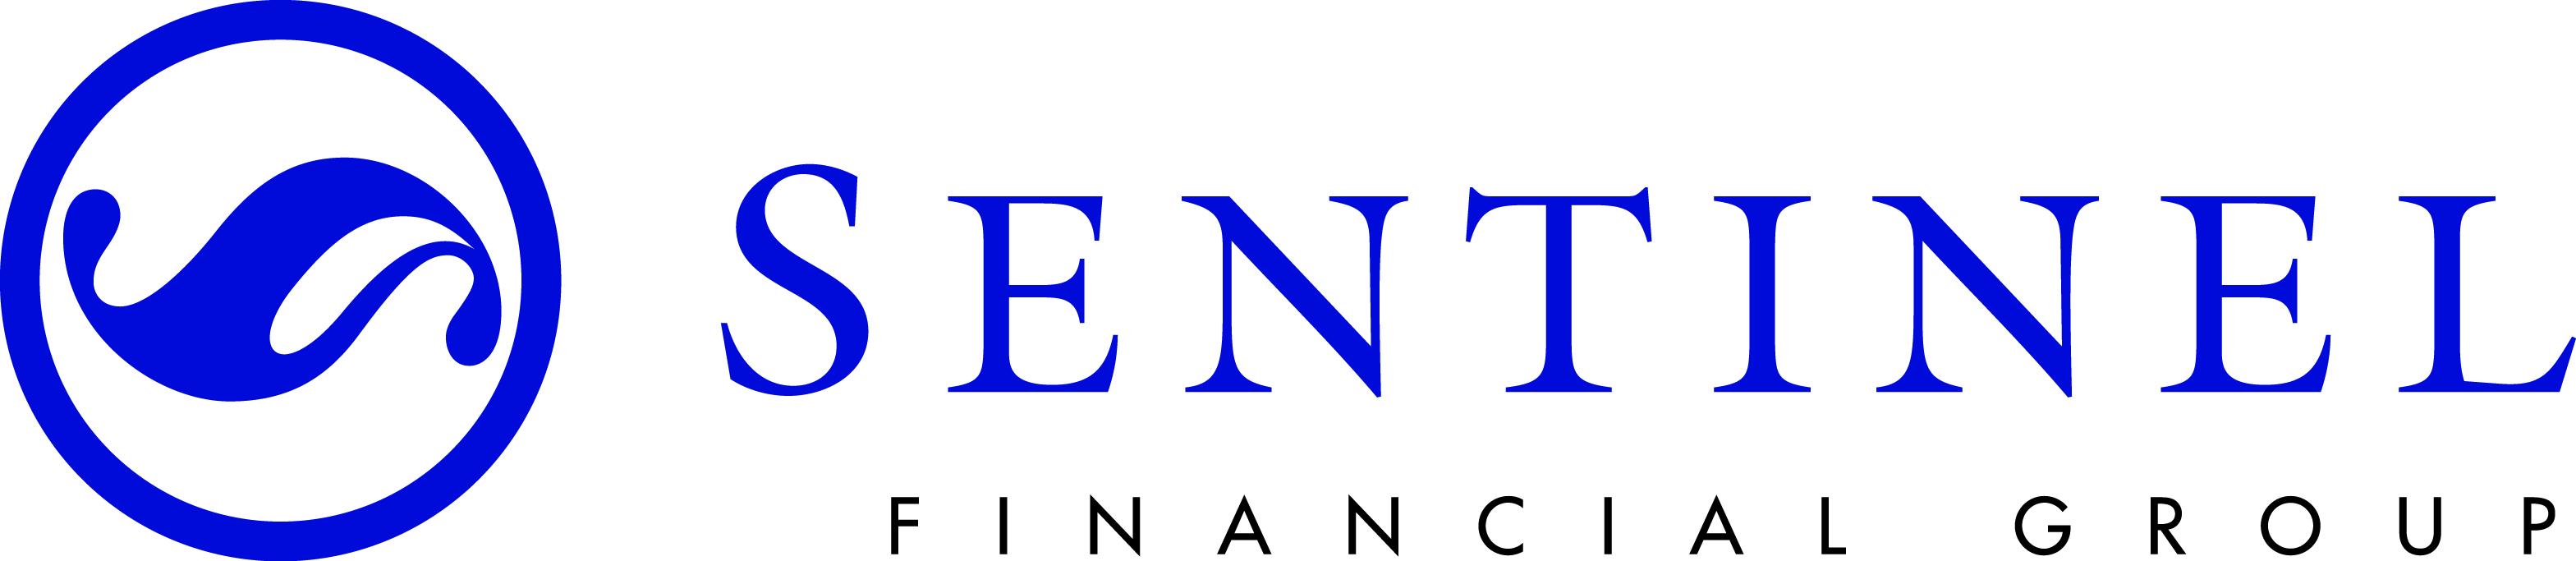 Sentinel Financial Group